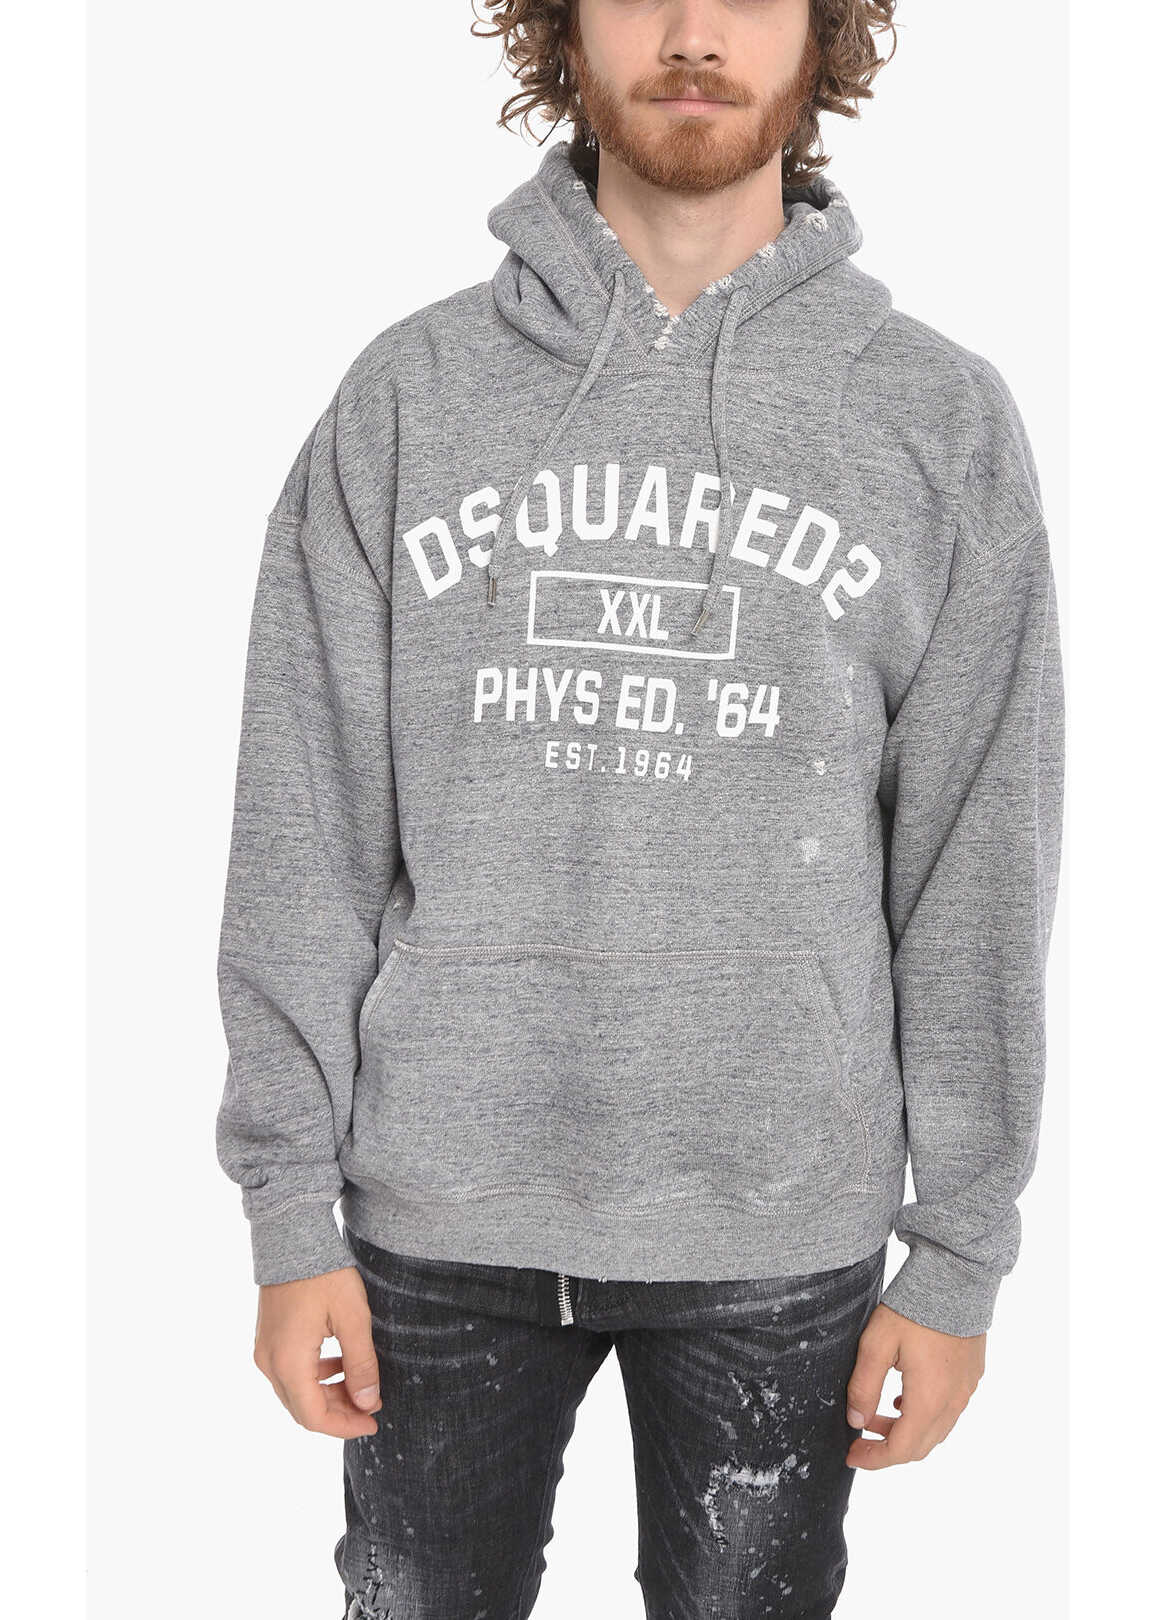 DSQUARED2 Brushed Cotton Phys Ed. \'64 Lived-In Hoodie Gray